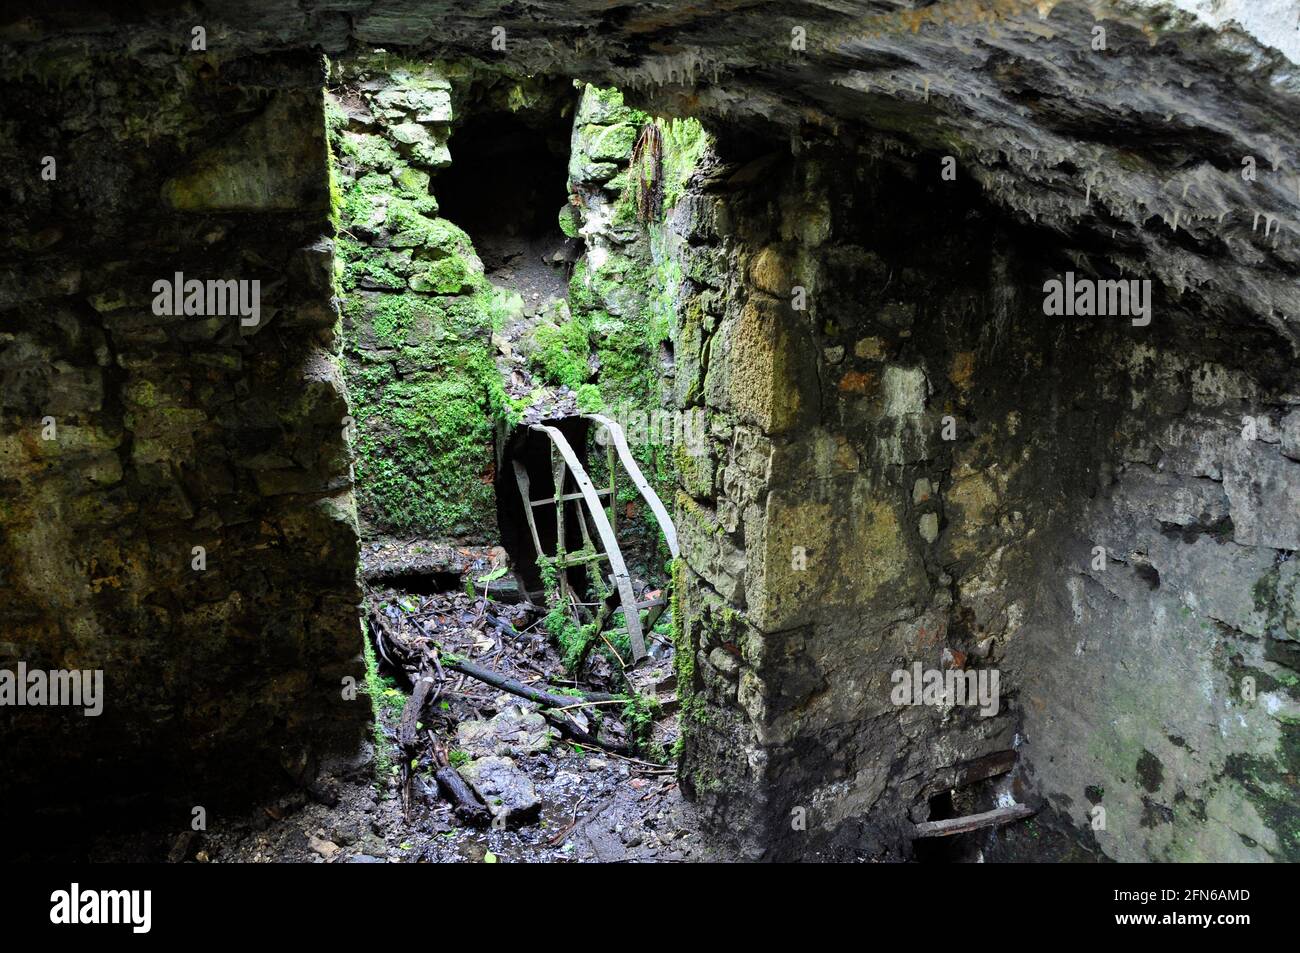 Remains of a water wheel at the Old Iron Works, Mells , Fussells' Lower Works.This is a biological Site of Special Scientific Interest, in the Wadbury Stock Photo